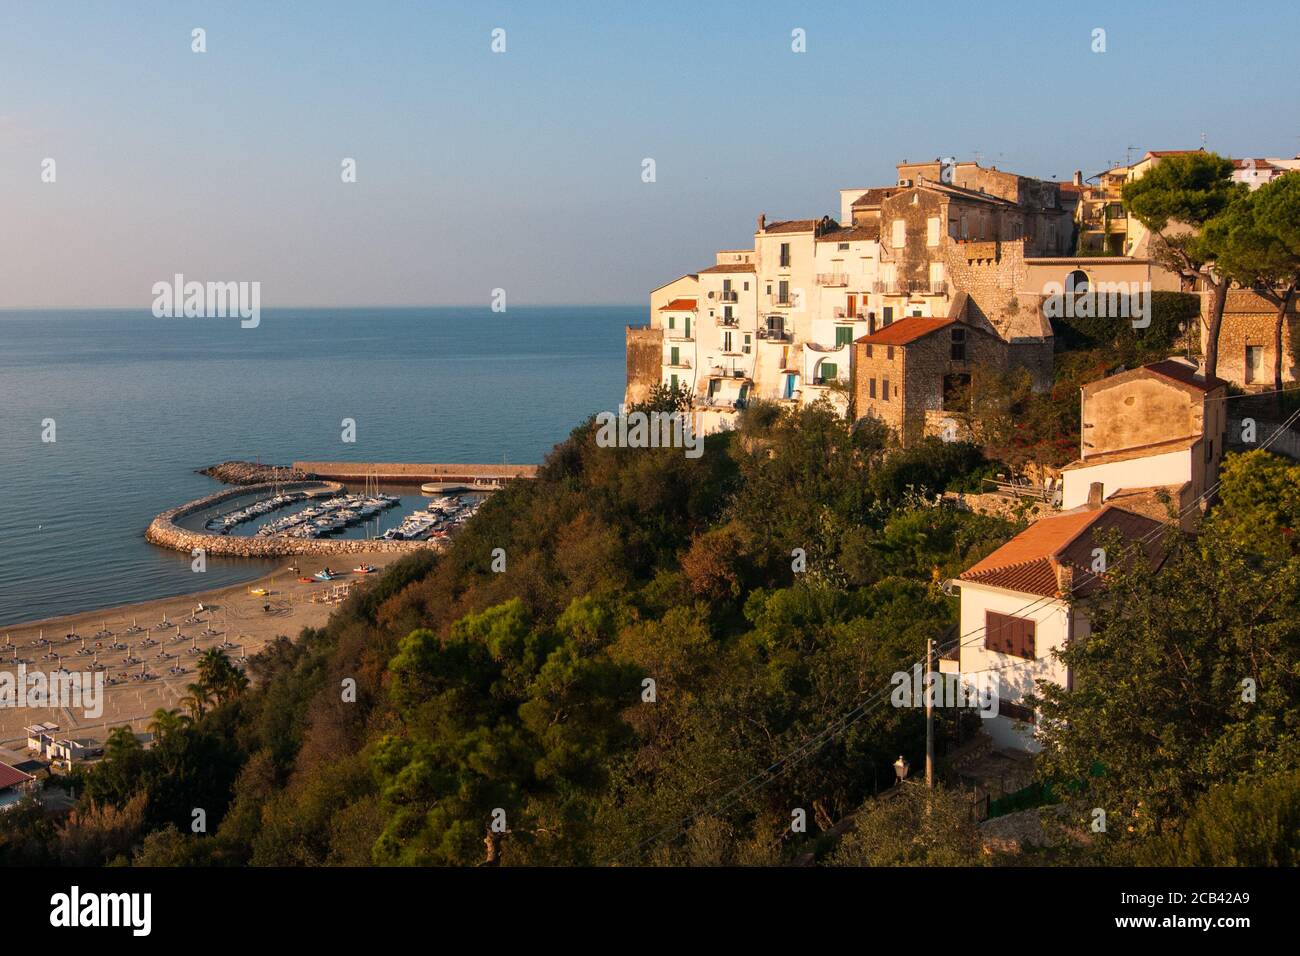 A view of the village of Sperlonga, Italy, a coastal town in the province of Latina, halfway between Rome and Naples. Stock Photo